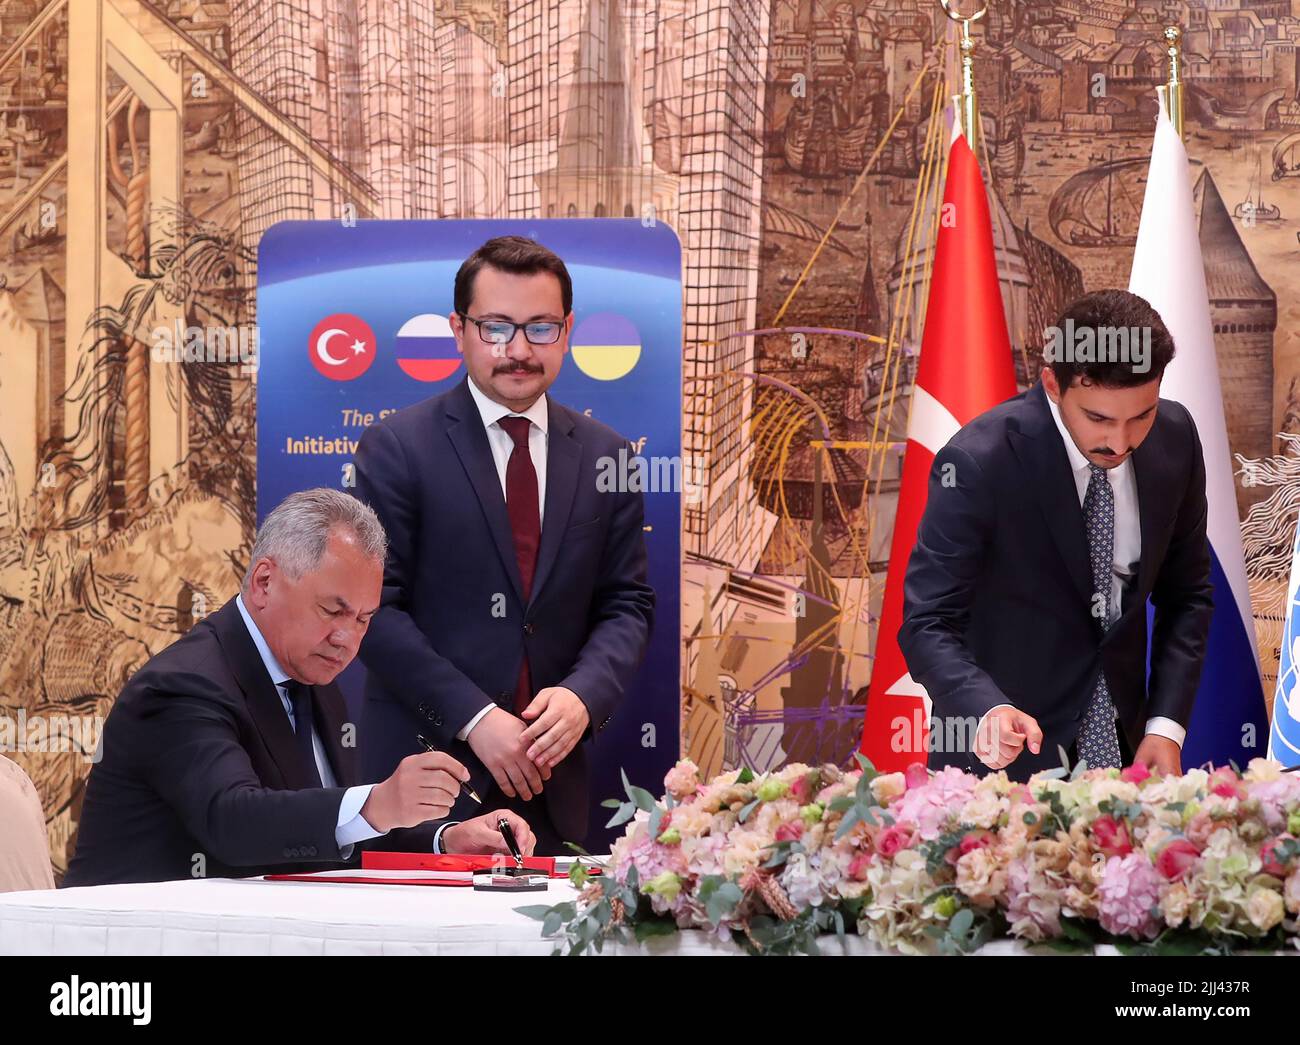 Istanbul, Turkey. 22nd July, 2022. Russian Defence Minister Sergei Shoigu attends a signature ceremony of an initiative on the safe transportation of grain and foodstuffs from Ukrainian ports, in Istanbul, on Friday on July 22, 2022. As a first major agreement between the warring parties since the invasion, Ukraine and Russia are expected to sign a deal in Istanbul today to free up the export of grain from Ukrainian ports. The deal has been brokered by the UN and Turkey. photo by Gokhan Mert/ Credit: UPI/Alamy Live News Stock Photo